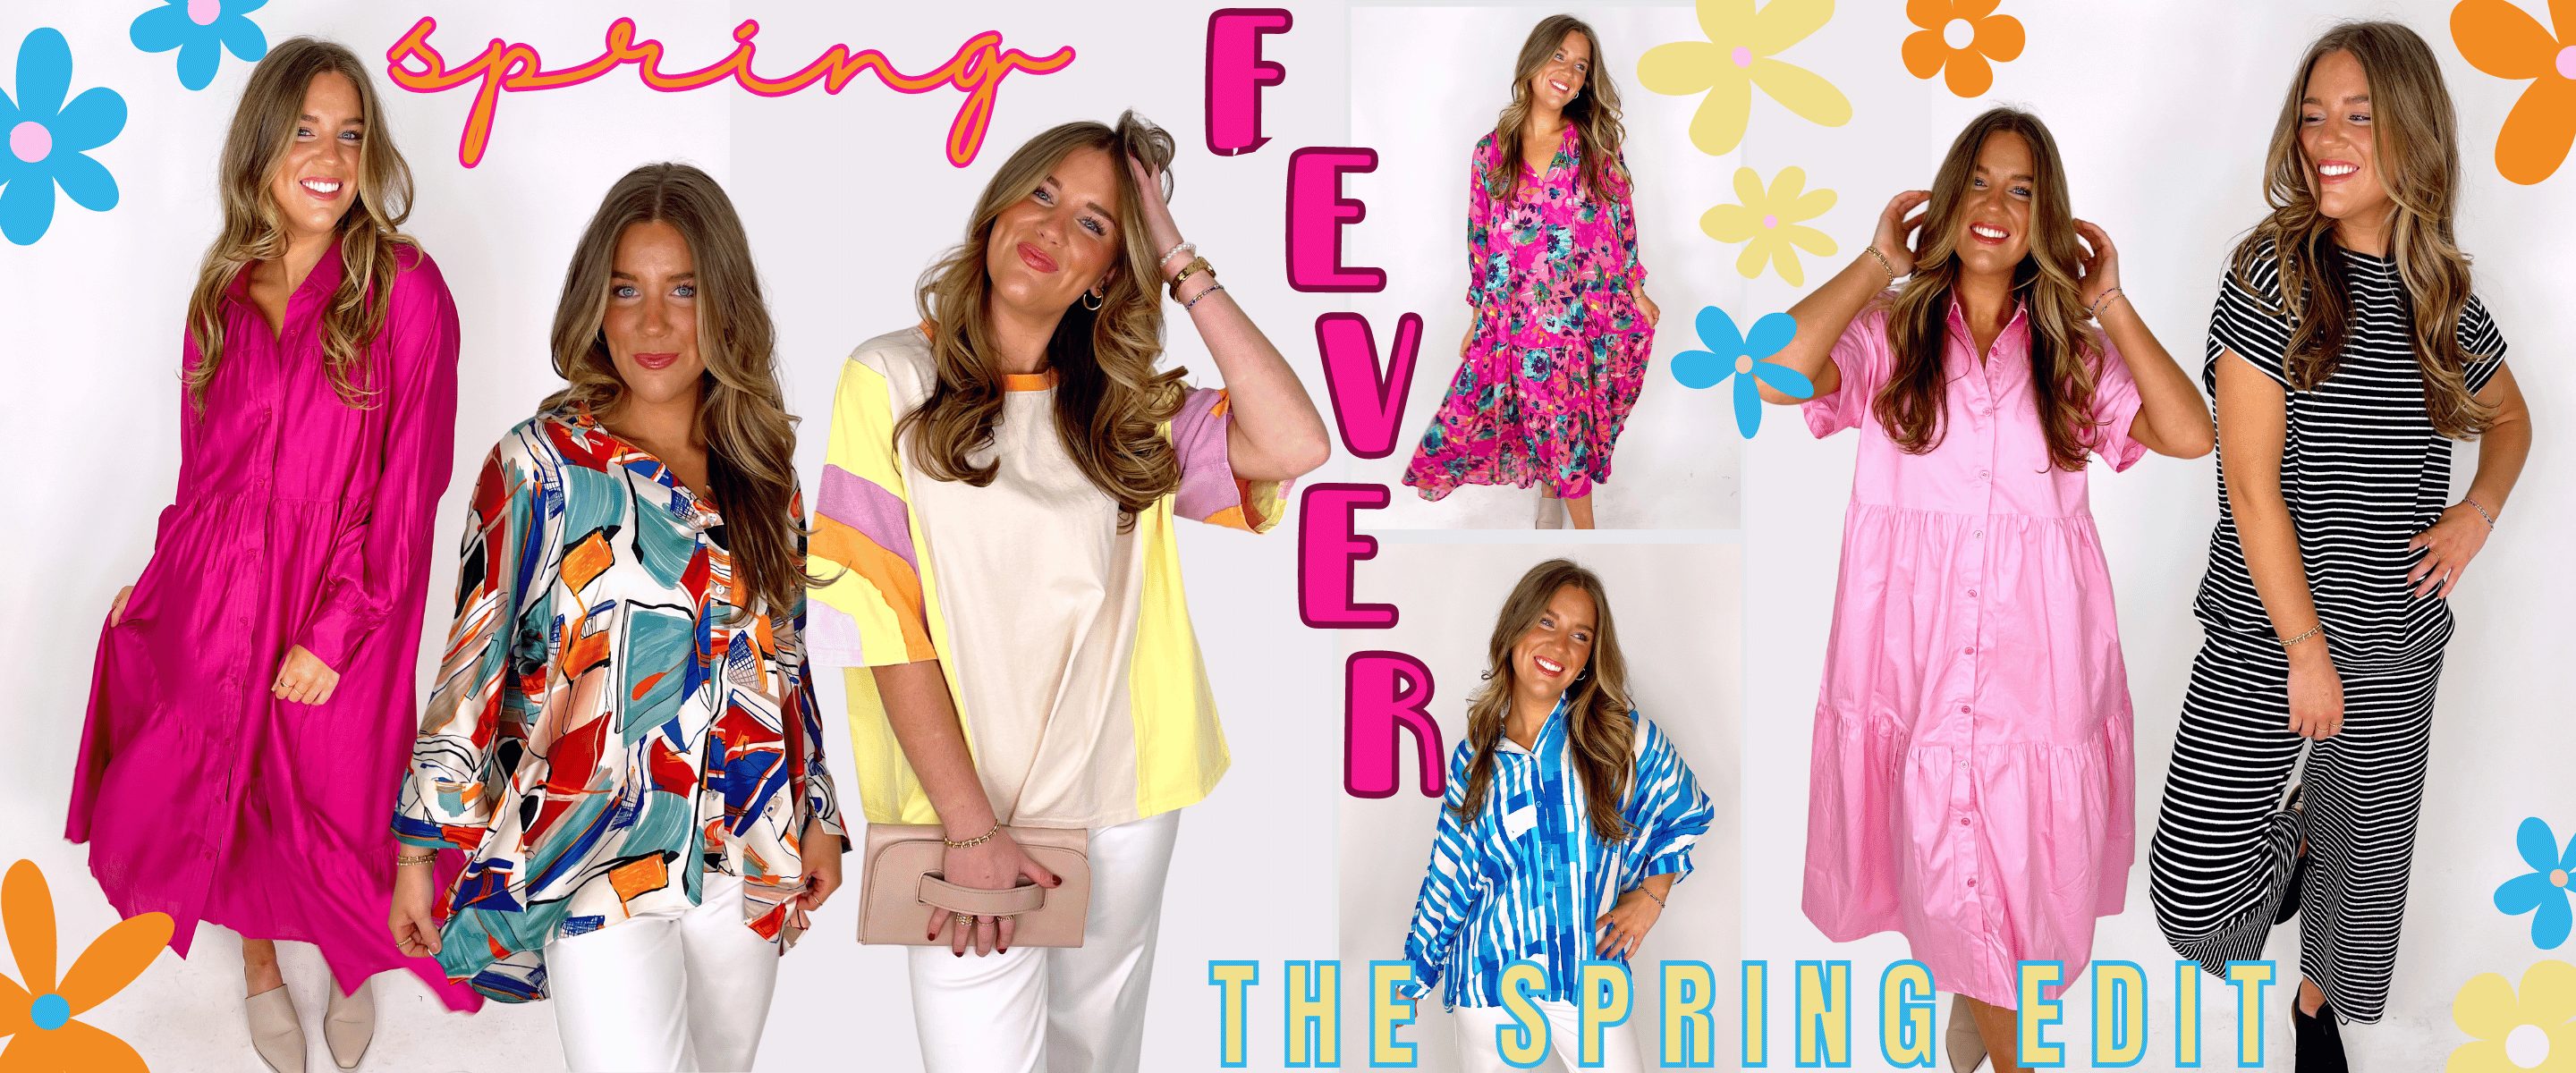 The Village Shoppe Online | Newest Collection | Spring Fever - The Spring Edit